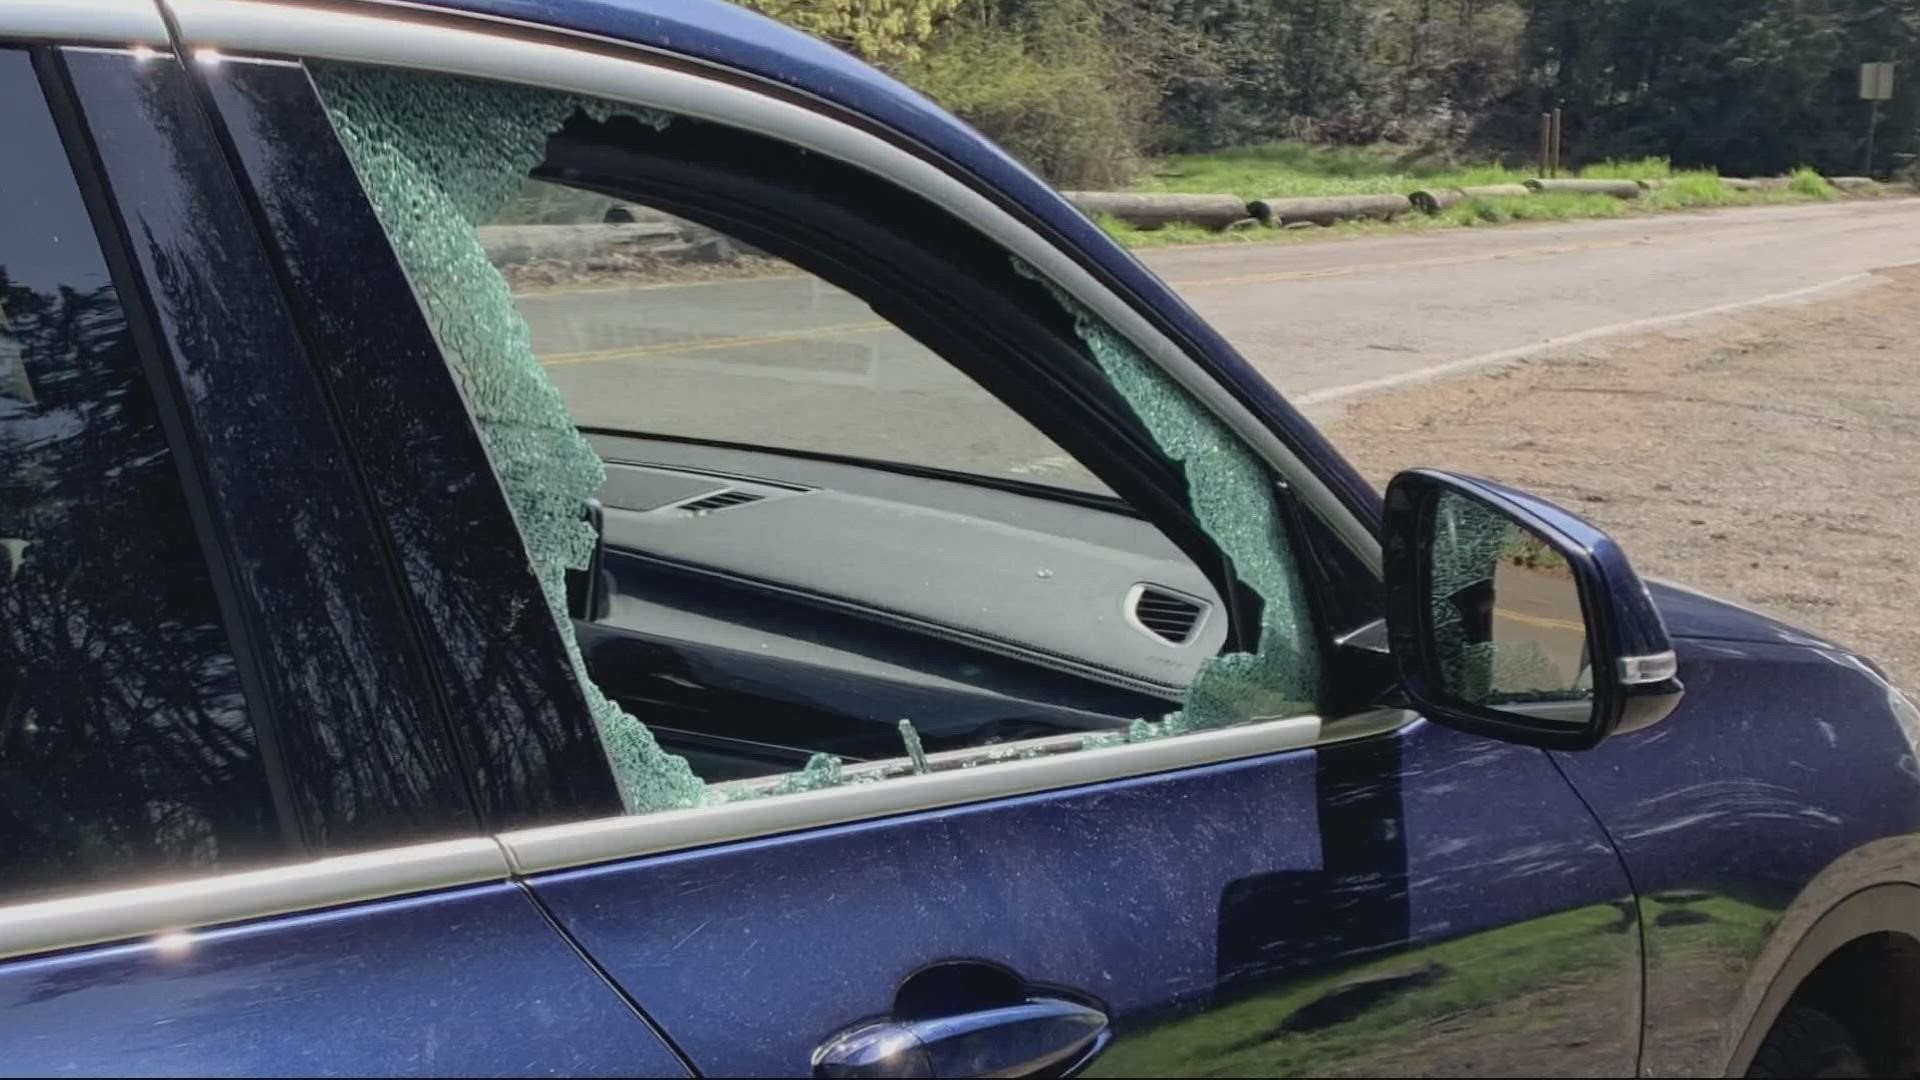 Parks officials warn visitors to not take their safety for granted as visitors report increase in smash-and-grab thefts.